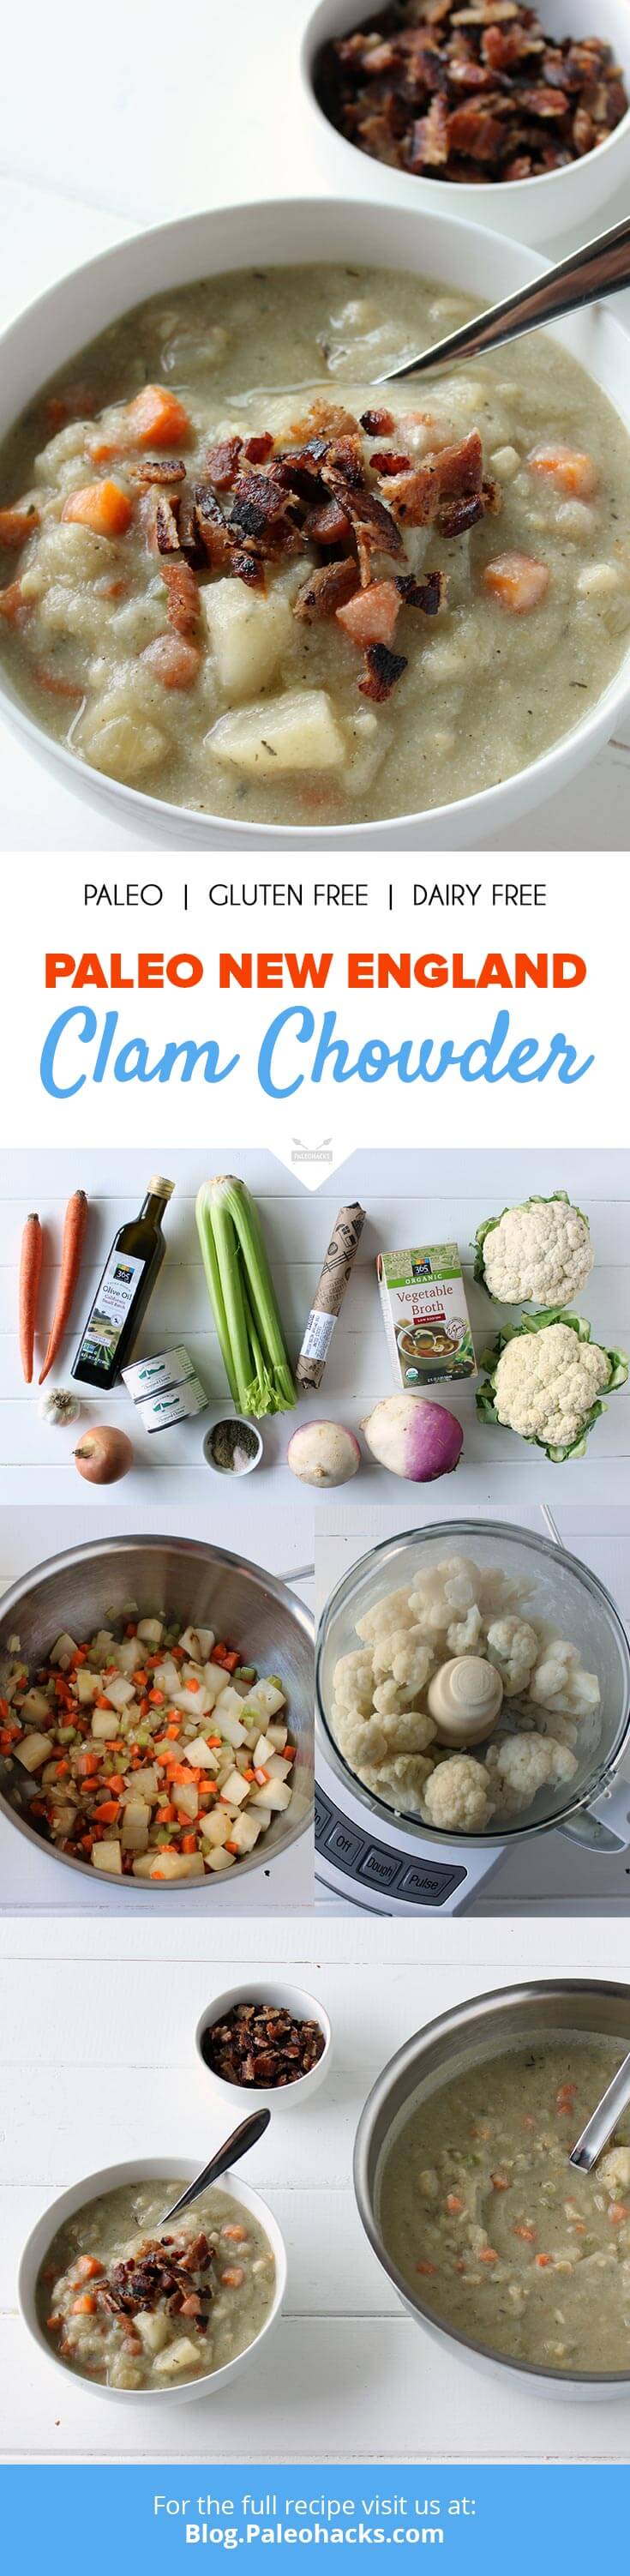 There's nothing like a hot bowl of soup on a breezy day, and nothing screams summer quite like a creamy Paleo New England clam chowder.